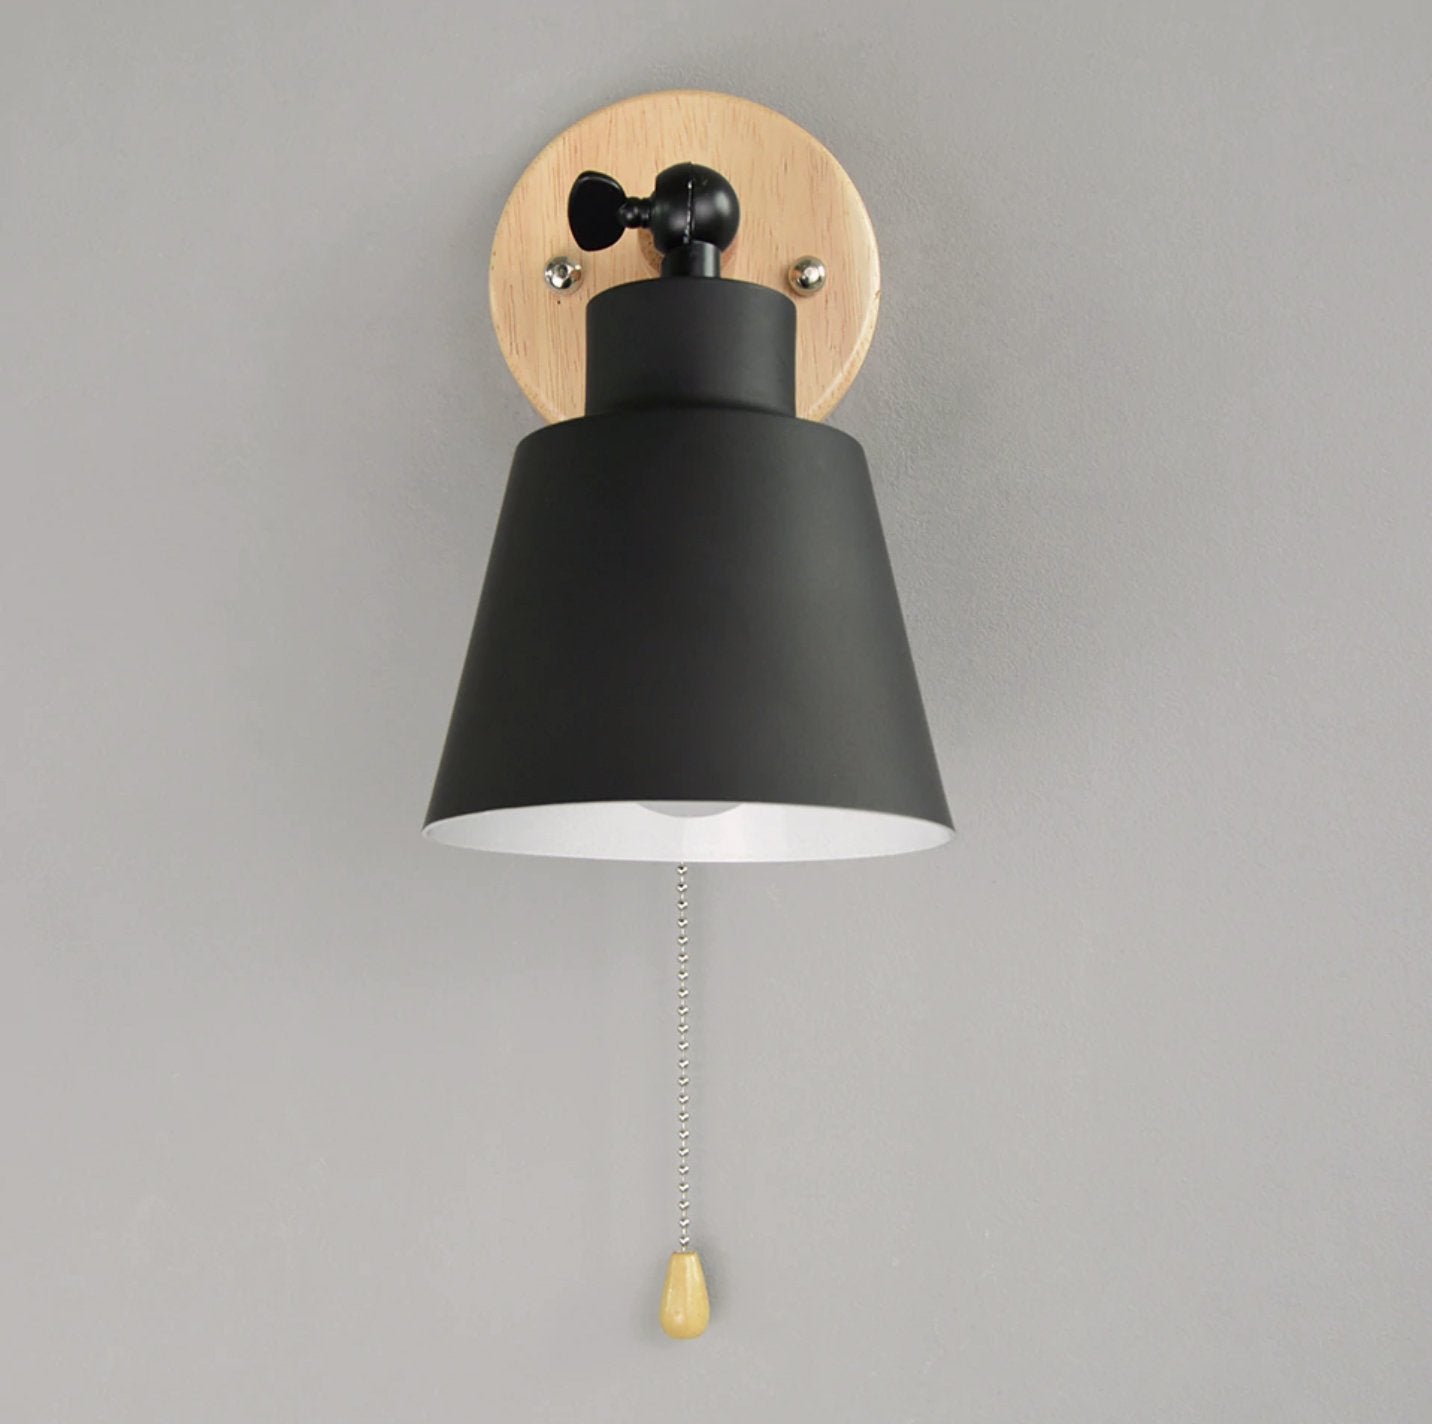 Devon Wall Sconce with Pull Chain Switch - Western Nest, LLC